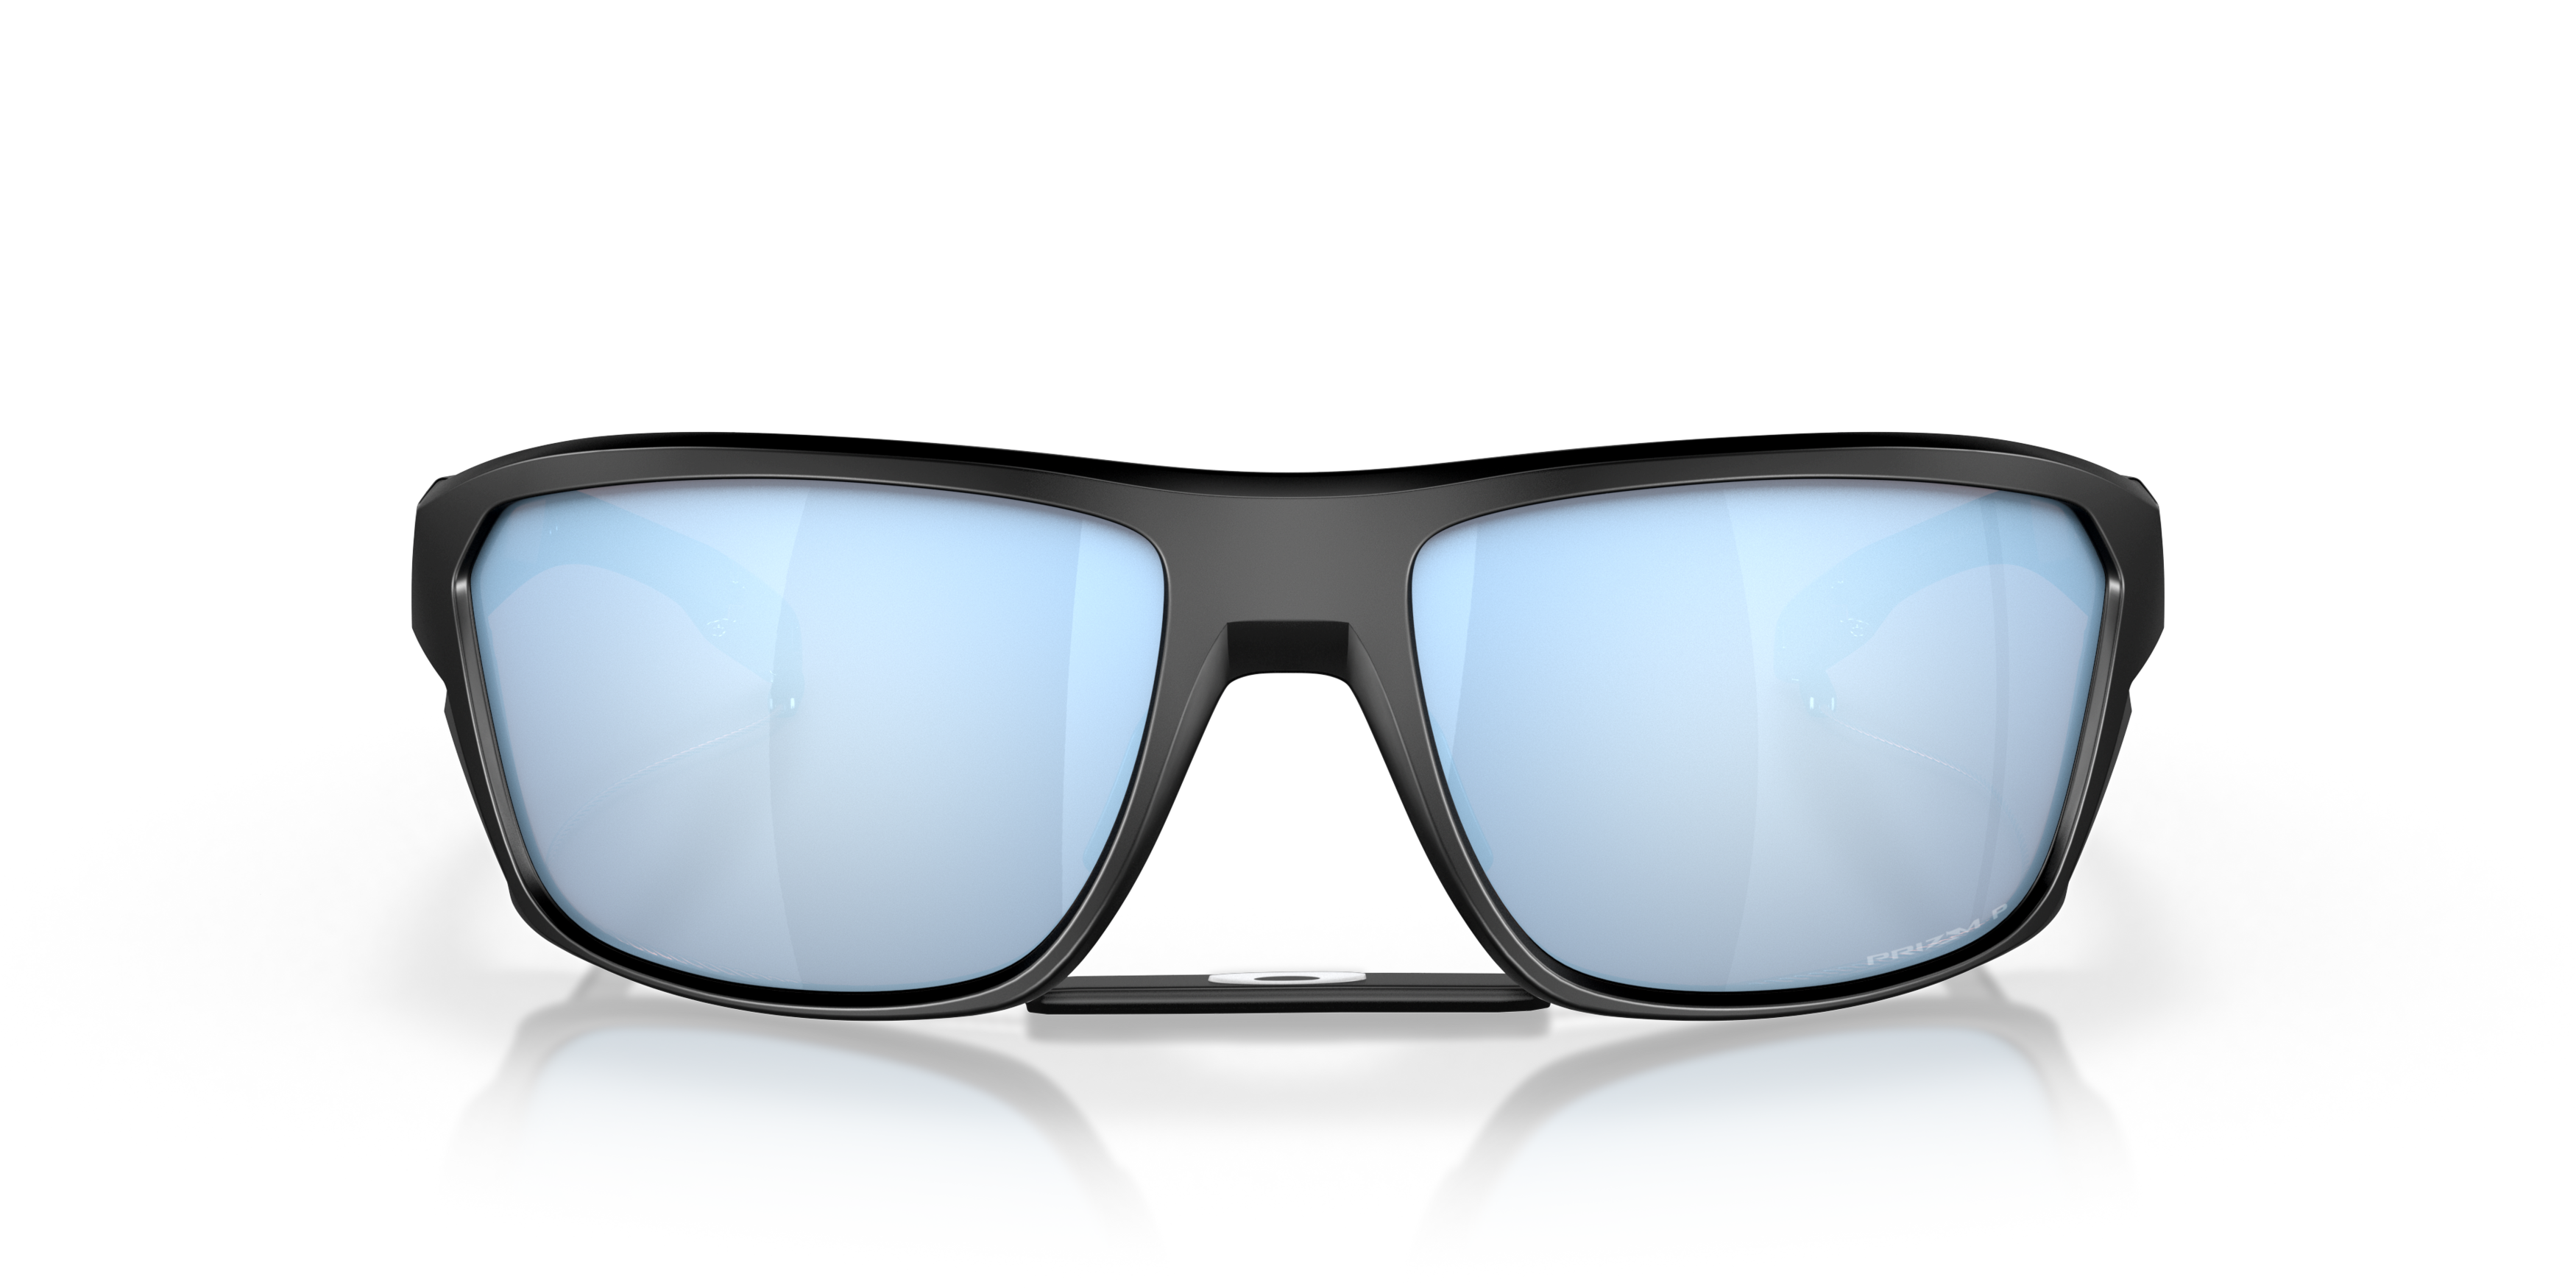 [products.image.front] OAKLEY OO9416 941606